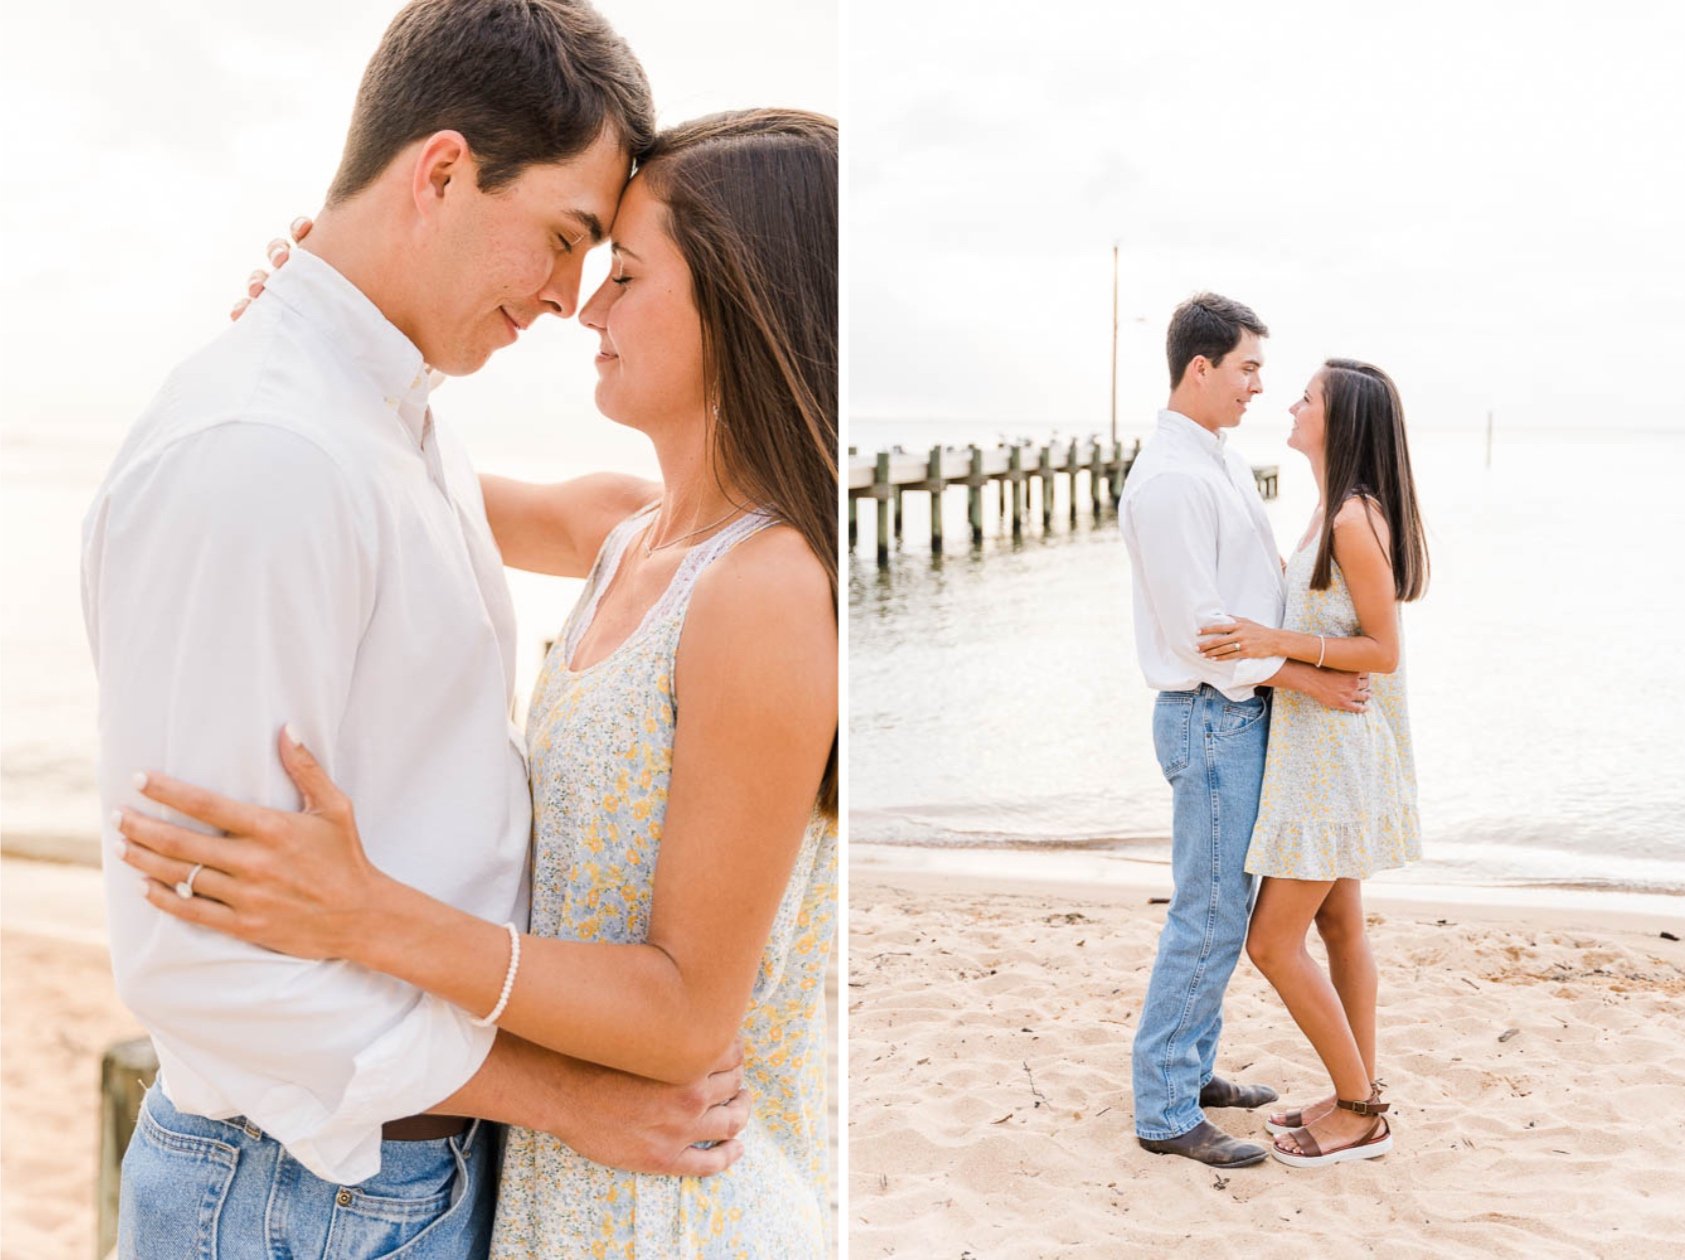 Fairhope Pier Proposal Photographed by Kristen Marcus Photography